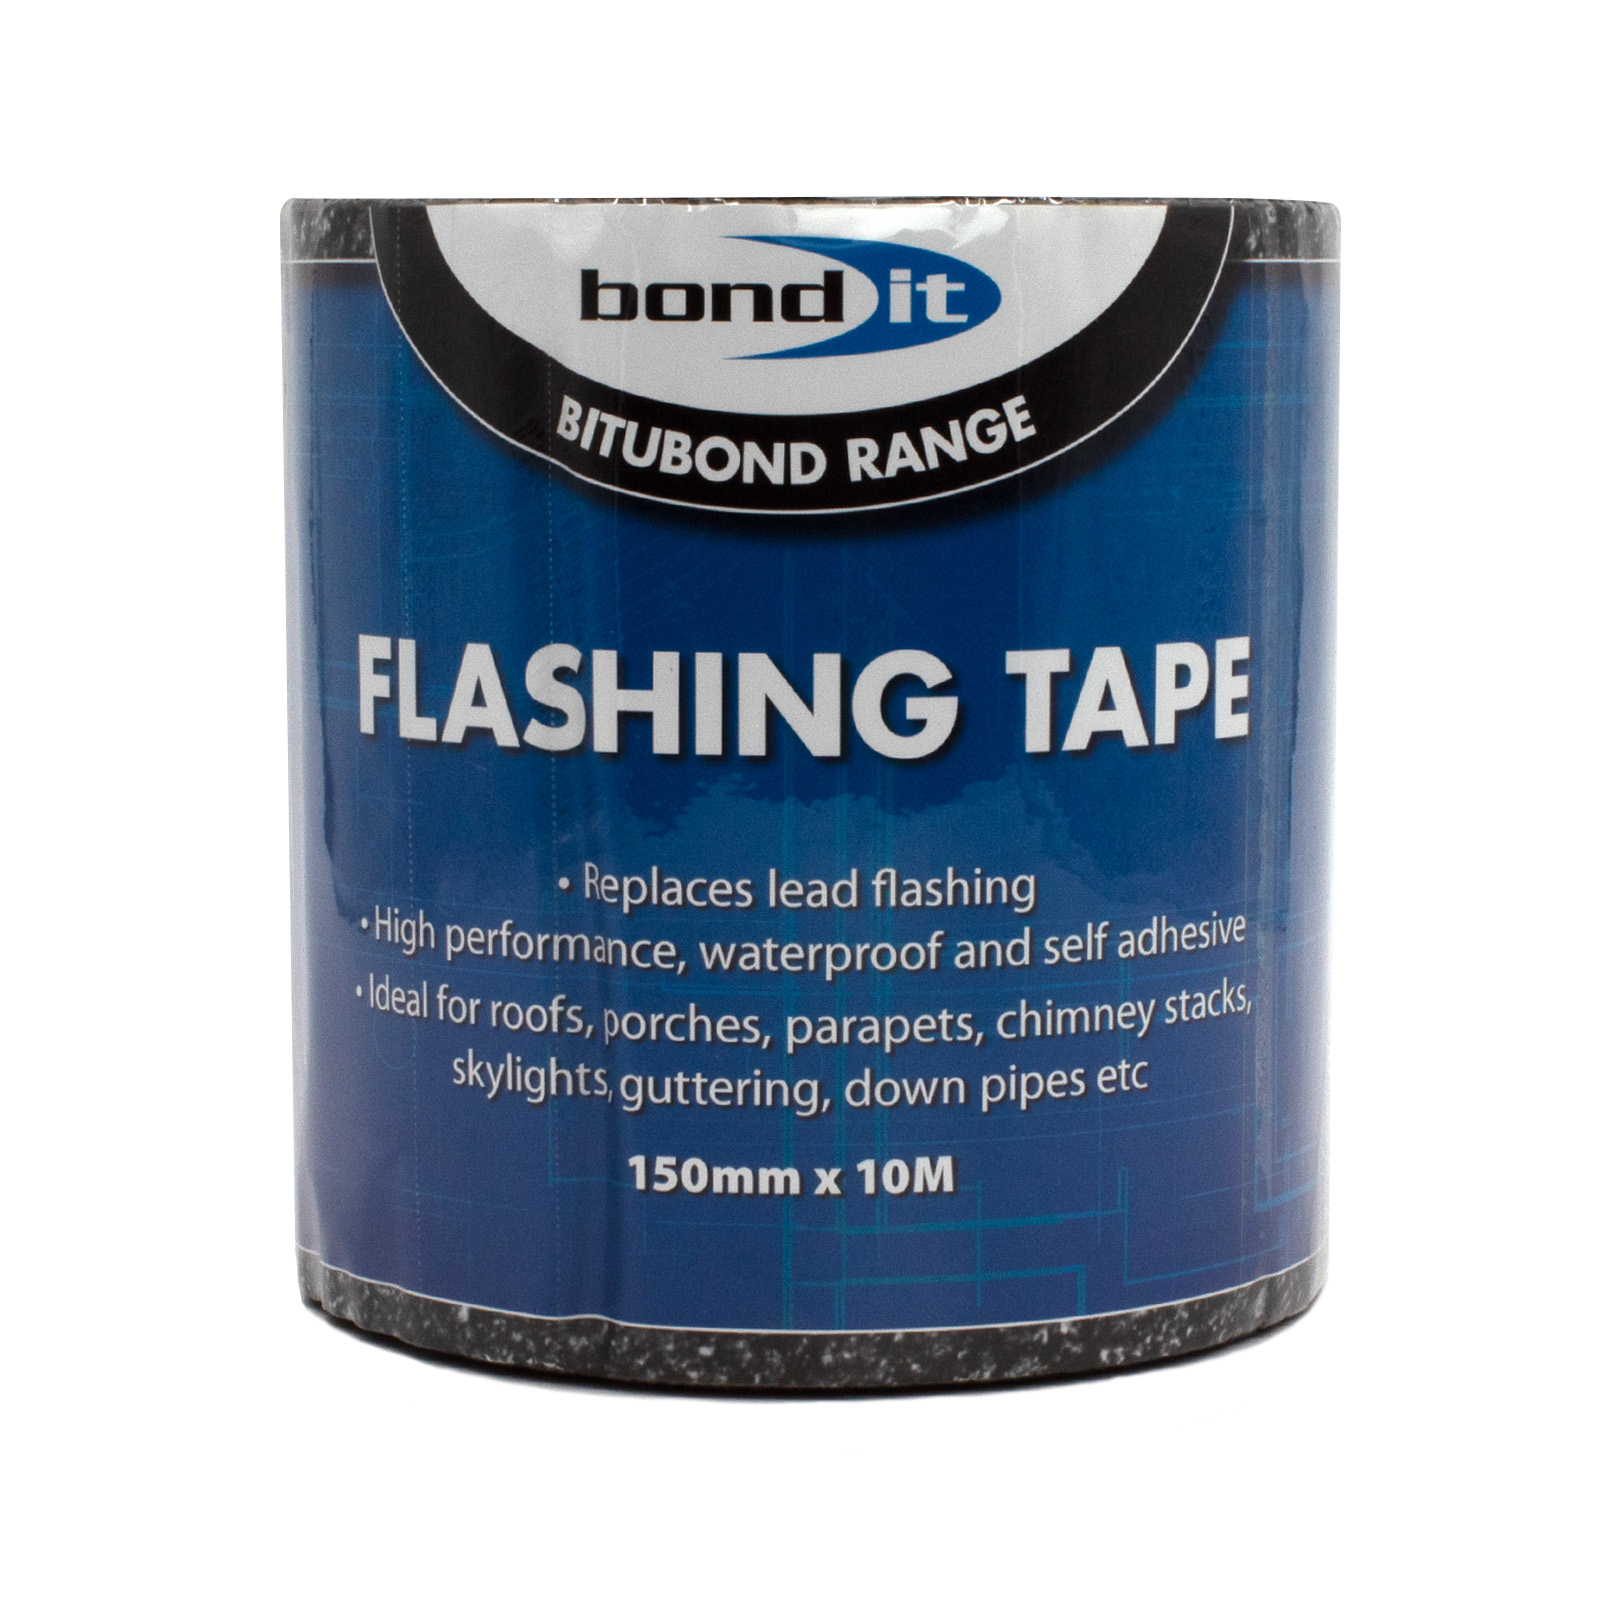 Expanded and Enhanced Flashing Tapes Available in New Sizes - Roofing